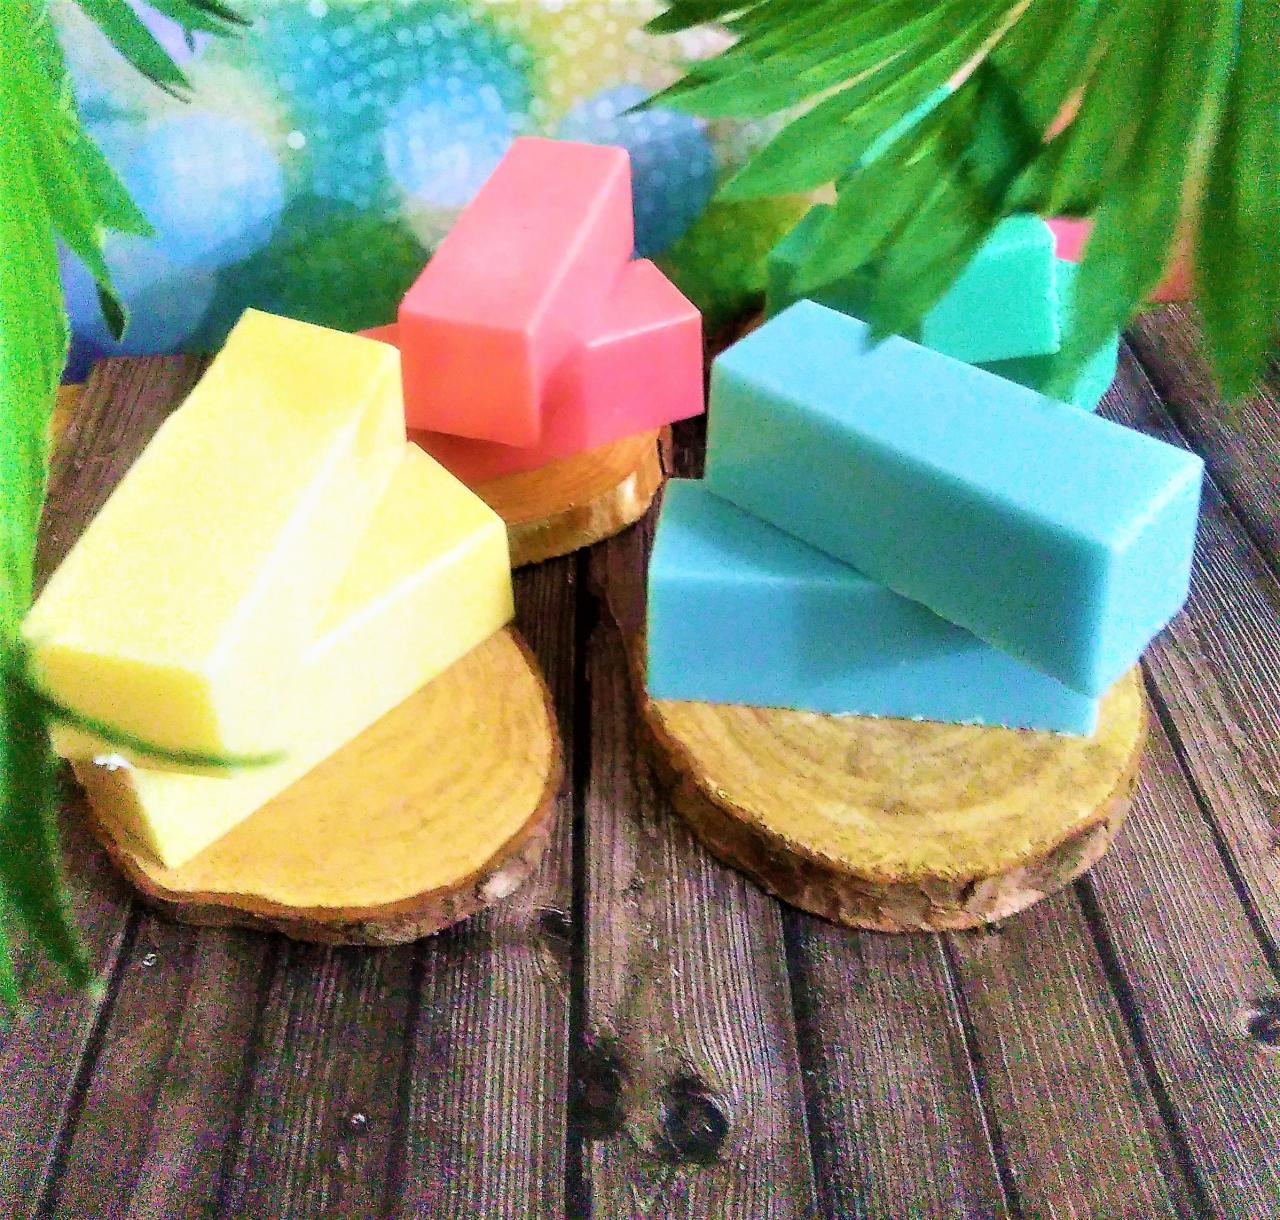 Soap Samples, Health And Beauty, Soap Samples, Beauty Samples, Bar Soap, Bathing Soap, Glycerin Soap, Artisan Soap, Set 8